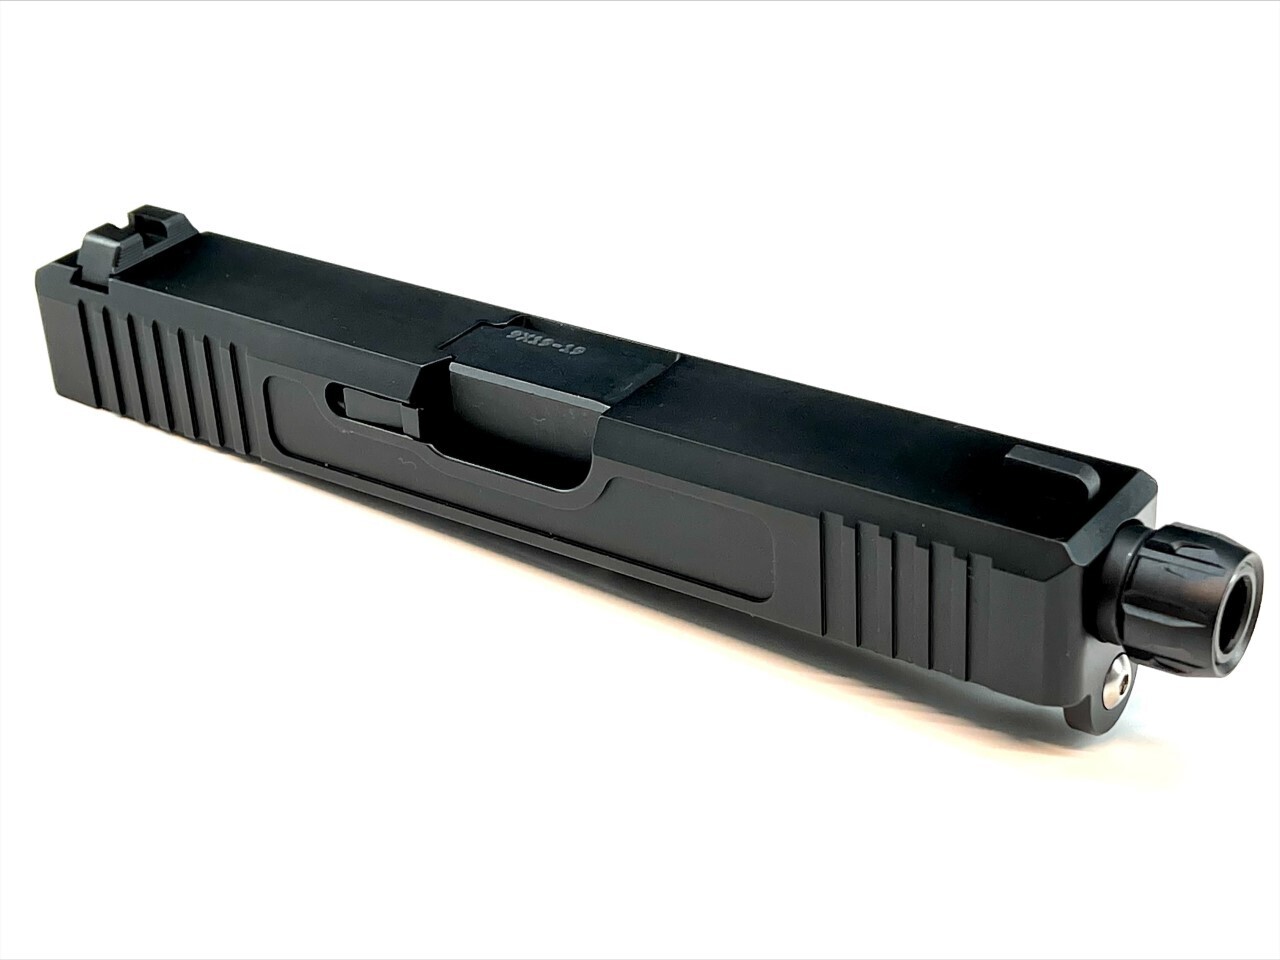 Glock 19 Slide With Front & Rear Serrations - Black Nitride Thread Barrel With Protector - Black Nitride Slide - Steel Sights - Stainless Steel Guide Rod - Comes Completely Assembled